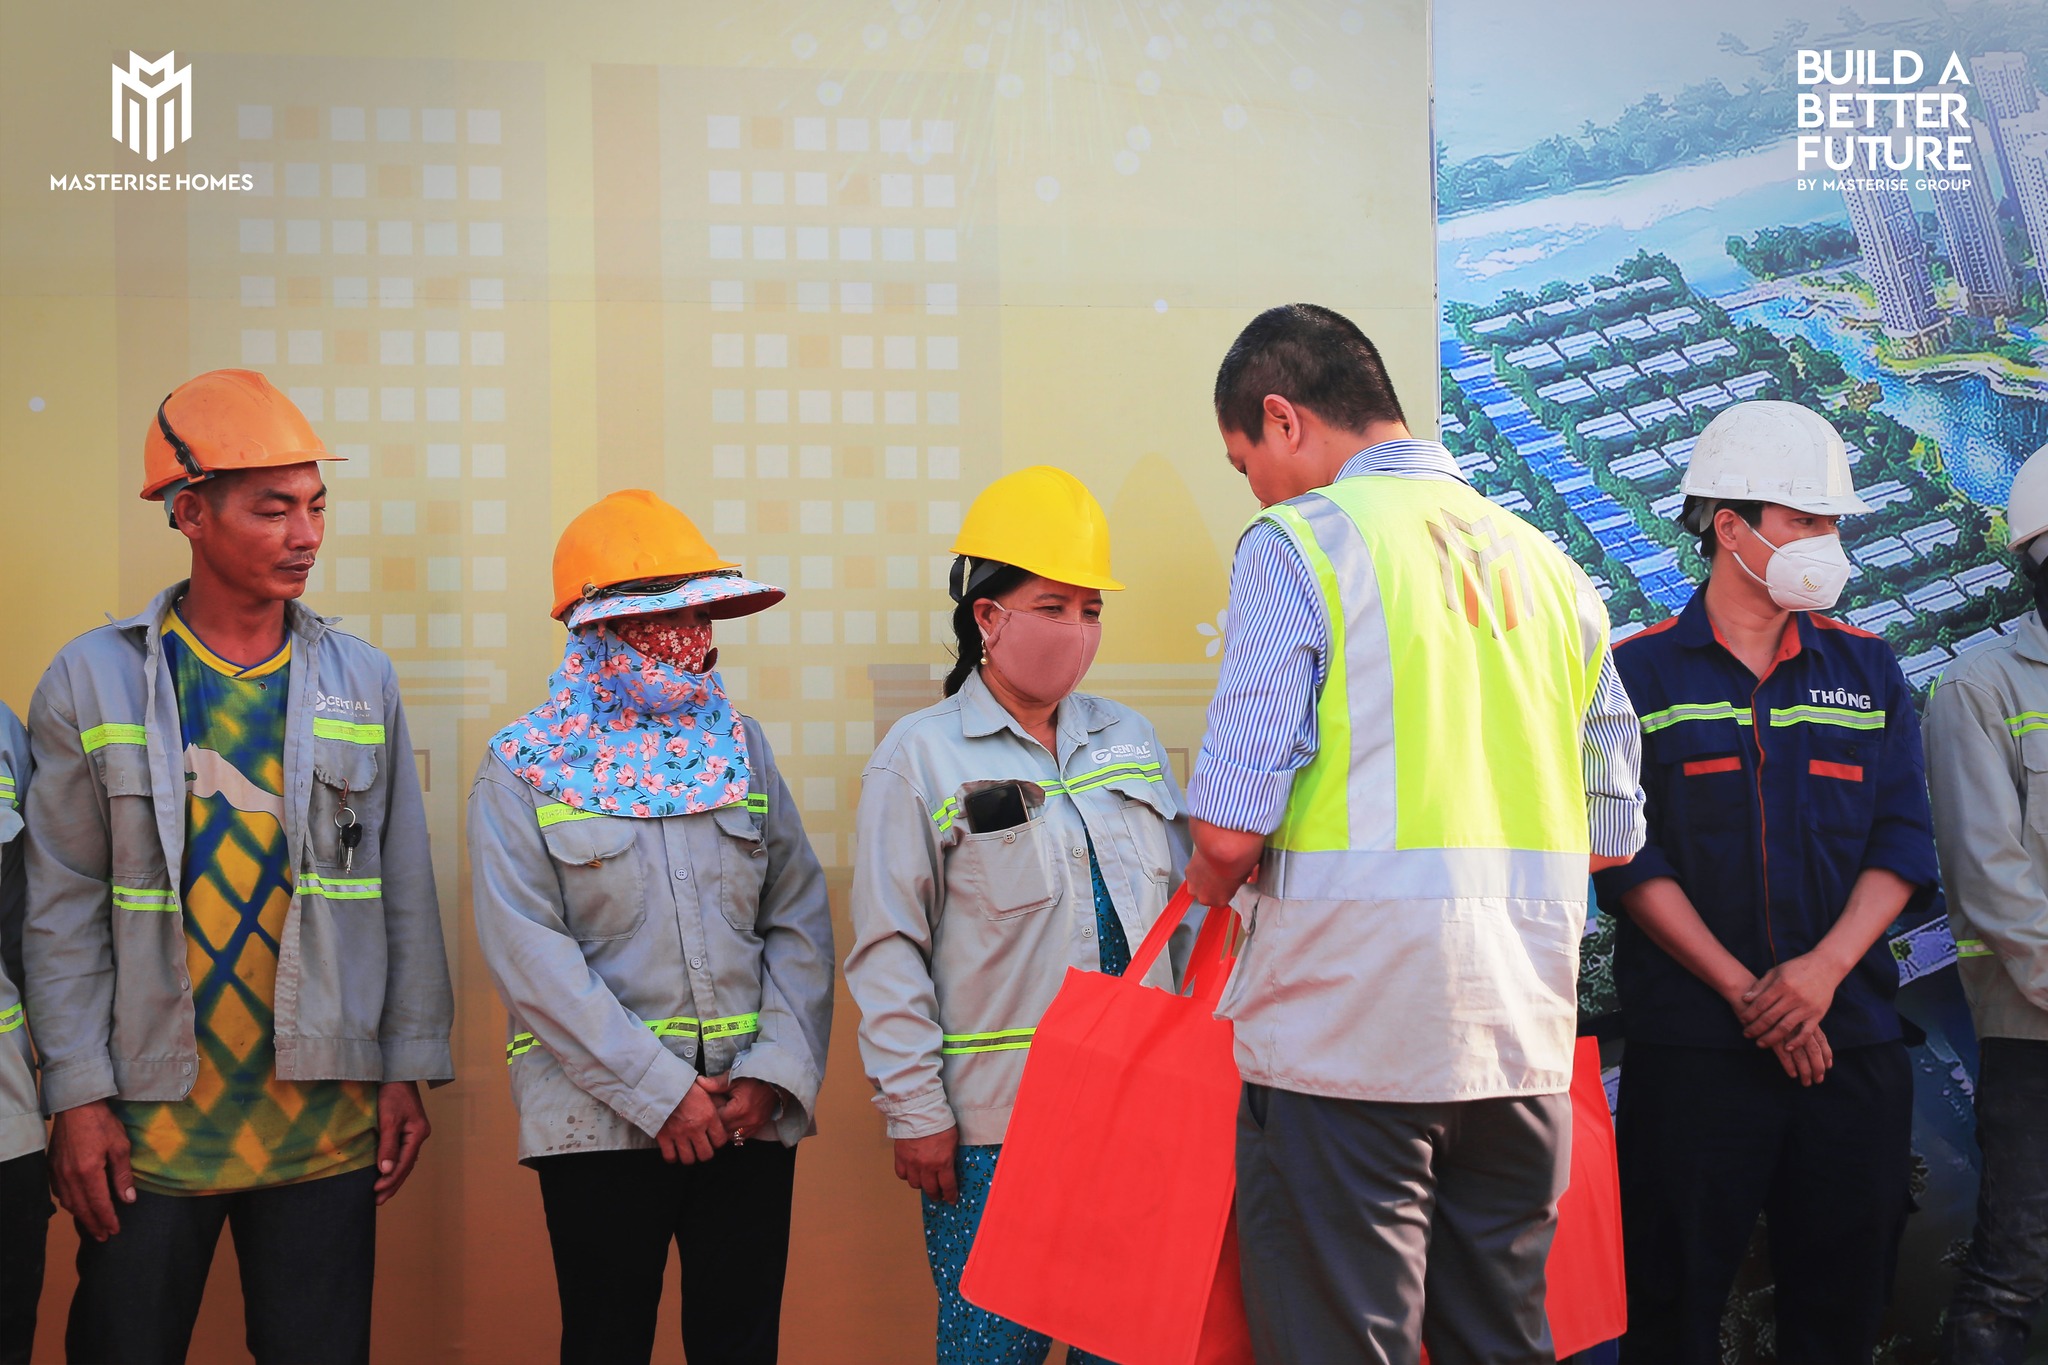 Masterise Homes "sends Tet" to more than 9,000 workers of all partner contractors